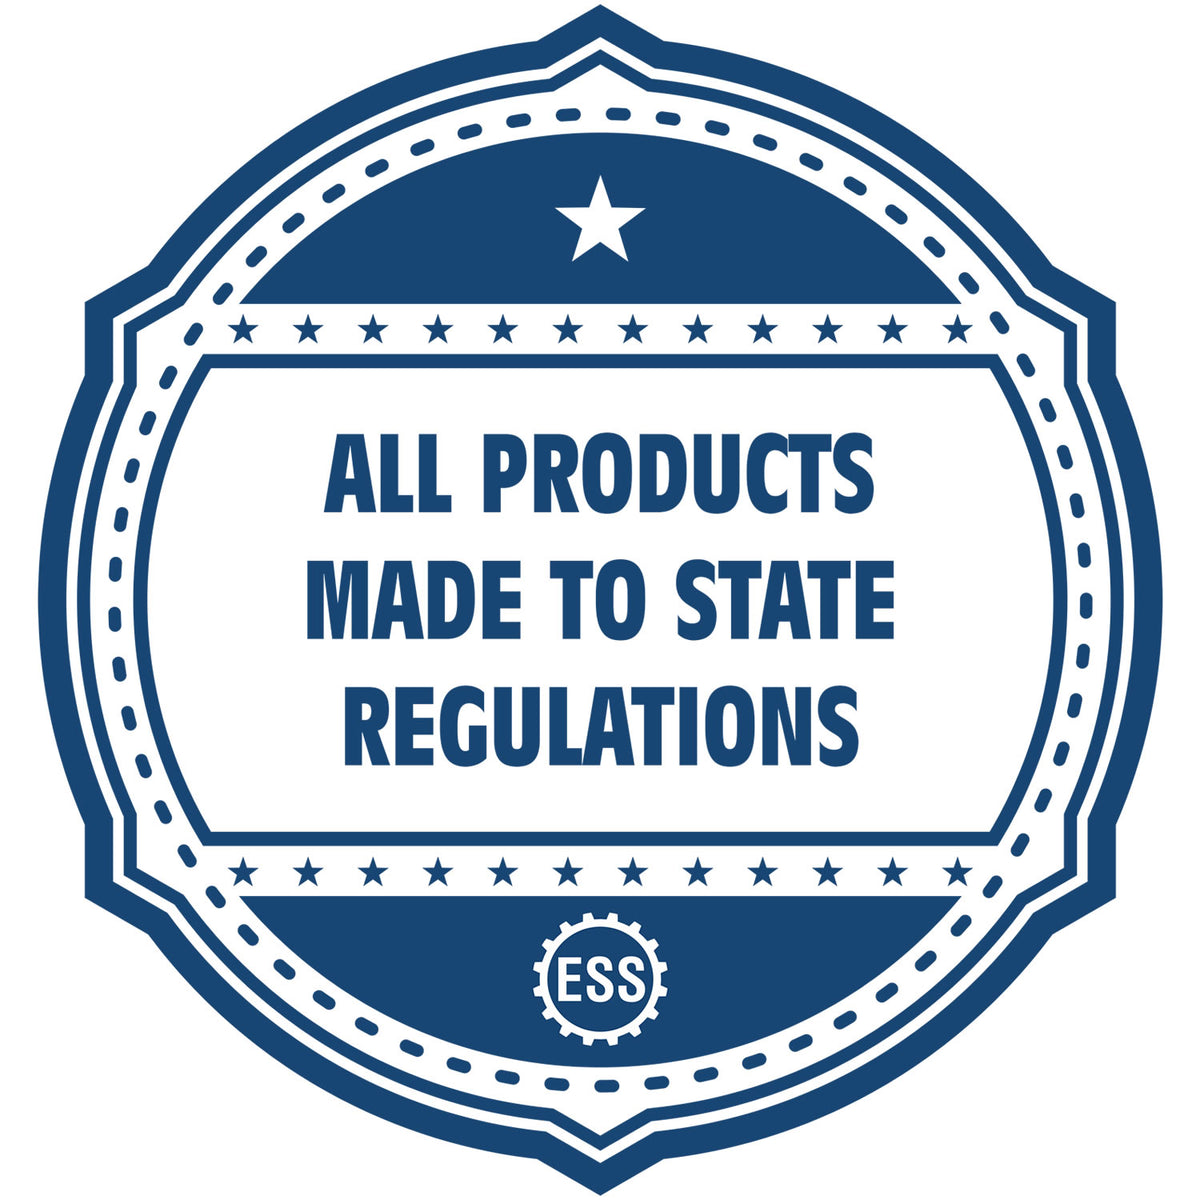 An icon or badge element for the Self-Inking Tennessee PE Stamp showing that this product is made in compliance with state regulations.